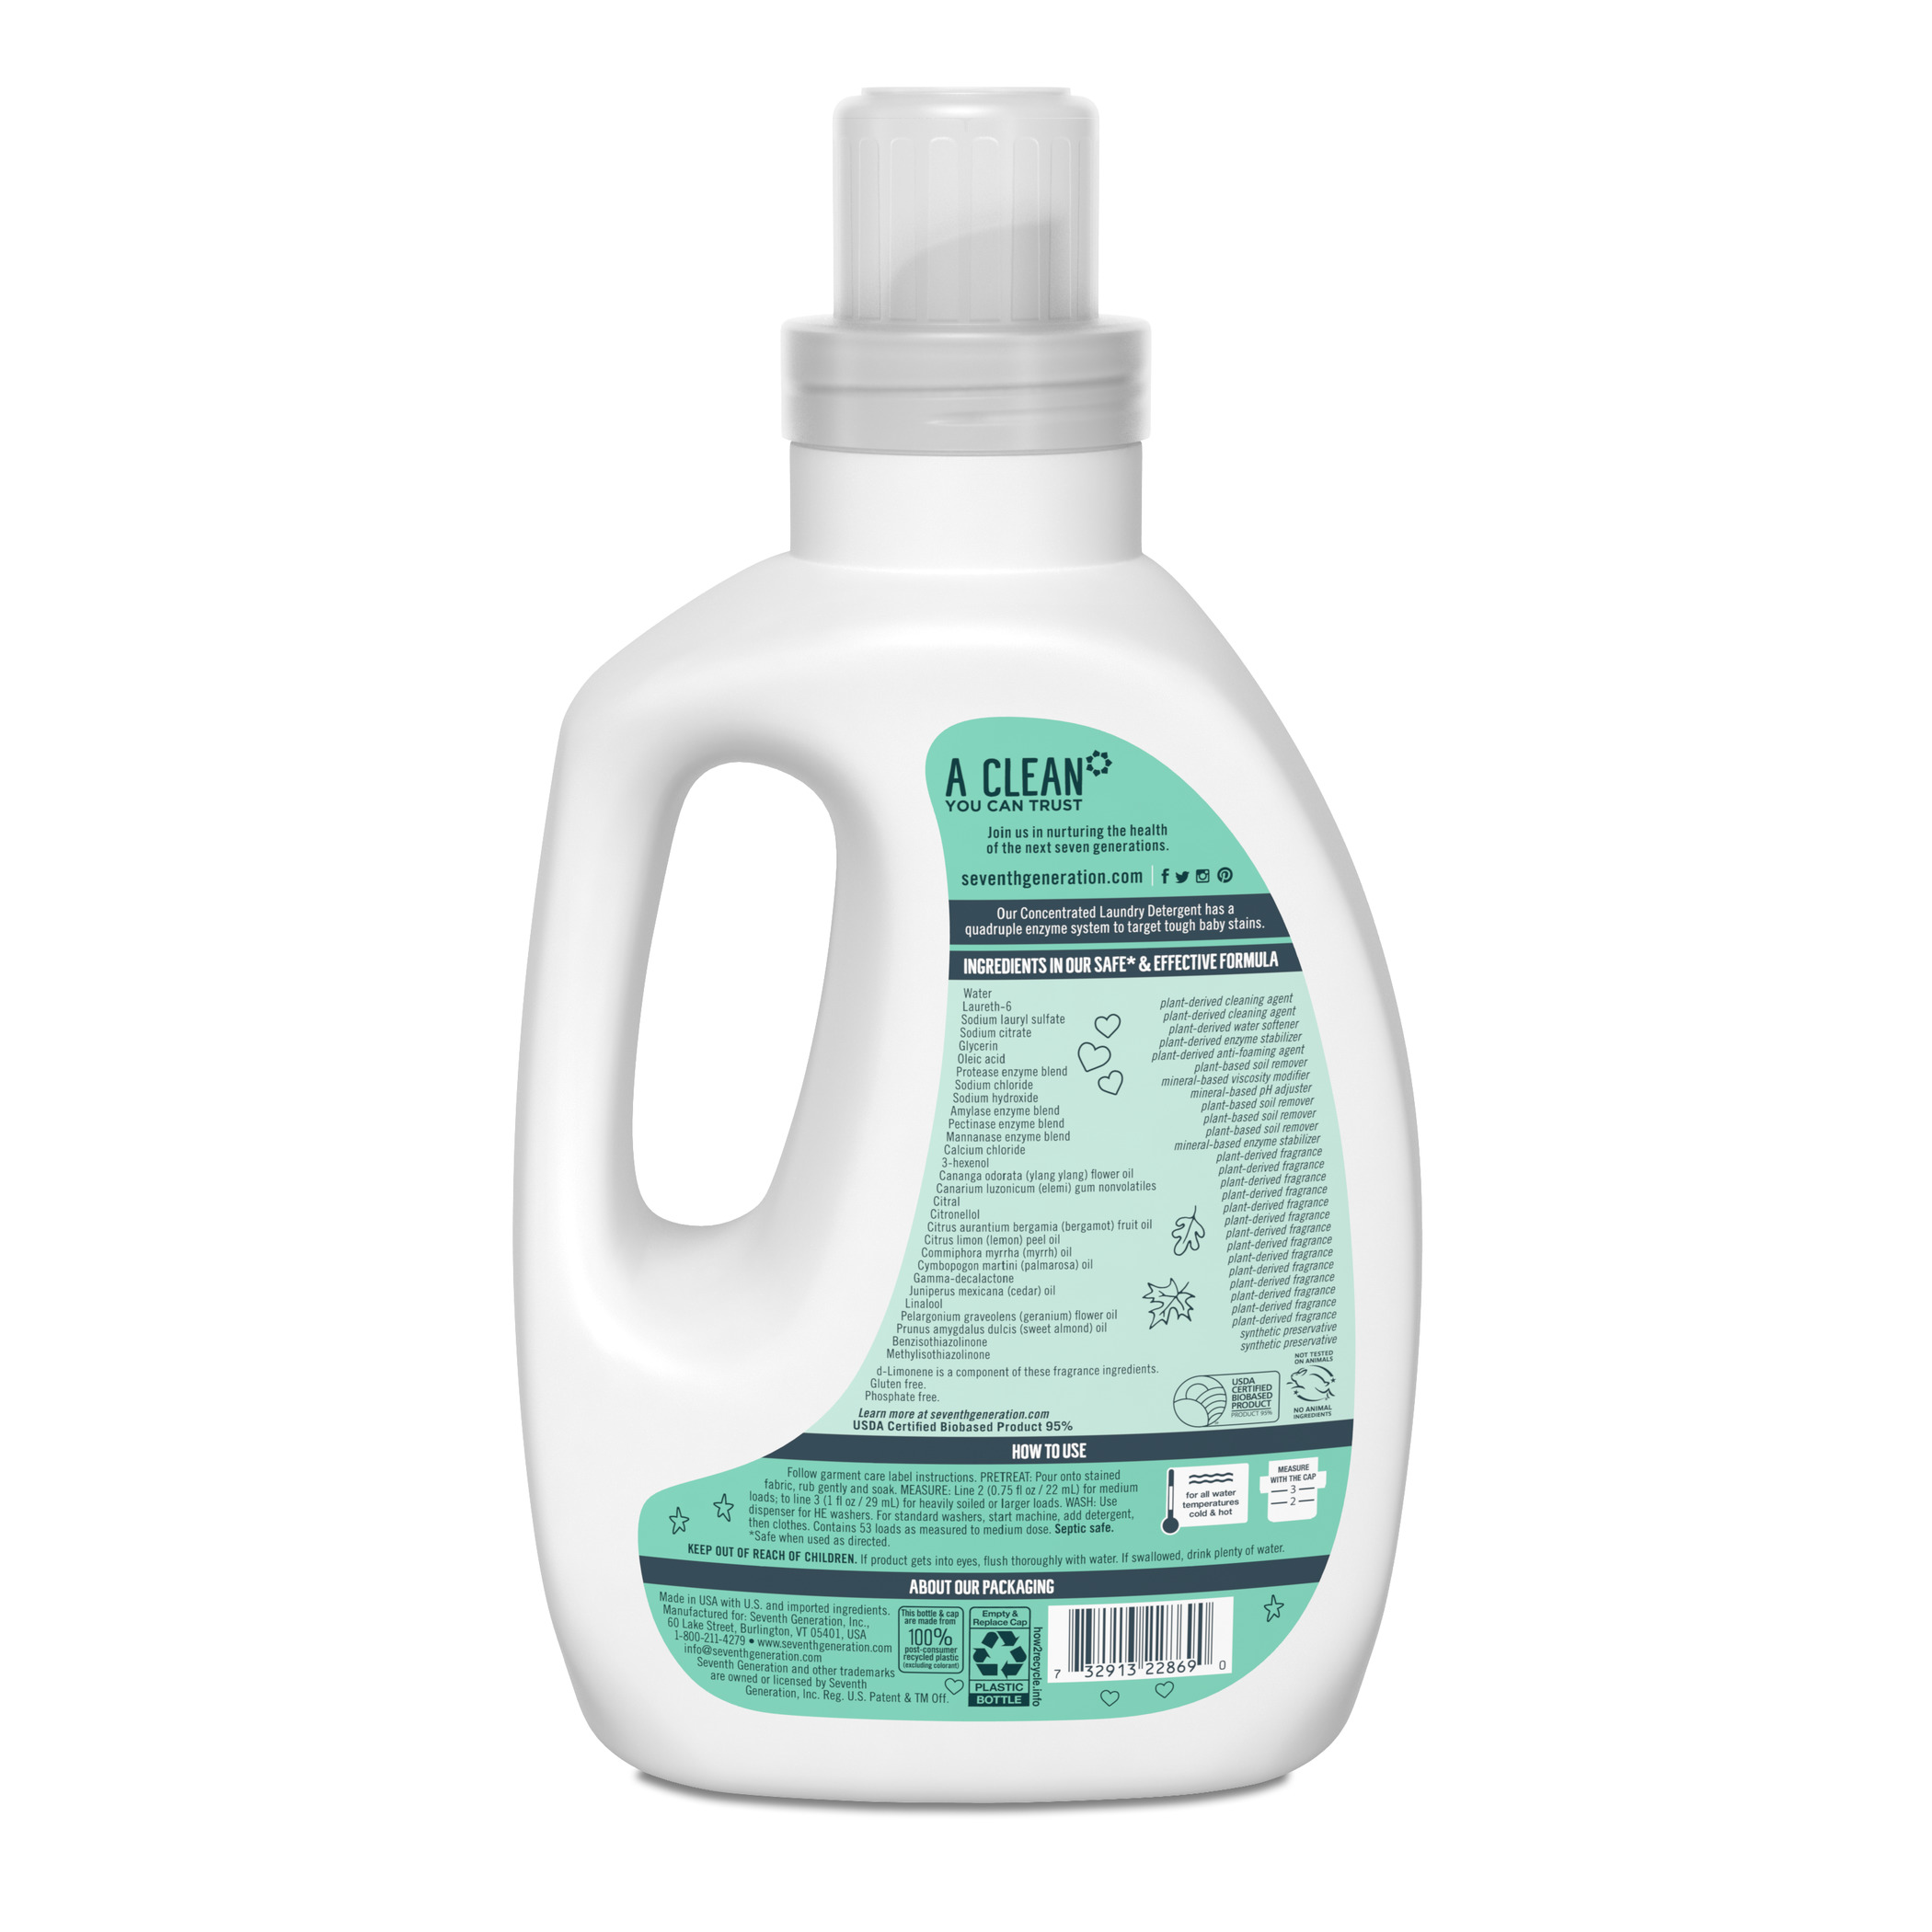 seventh generation baby laundry detergent reviews